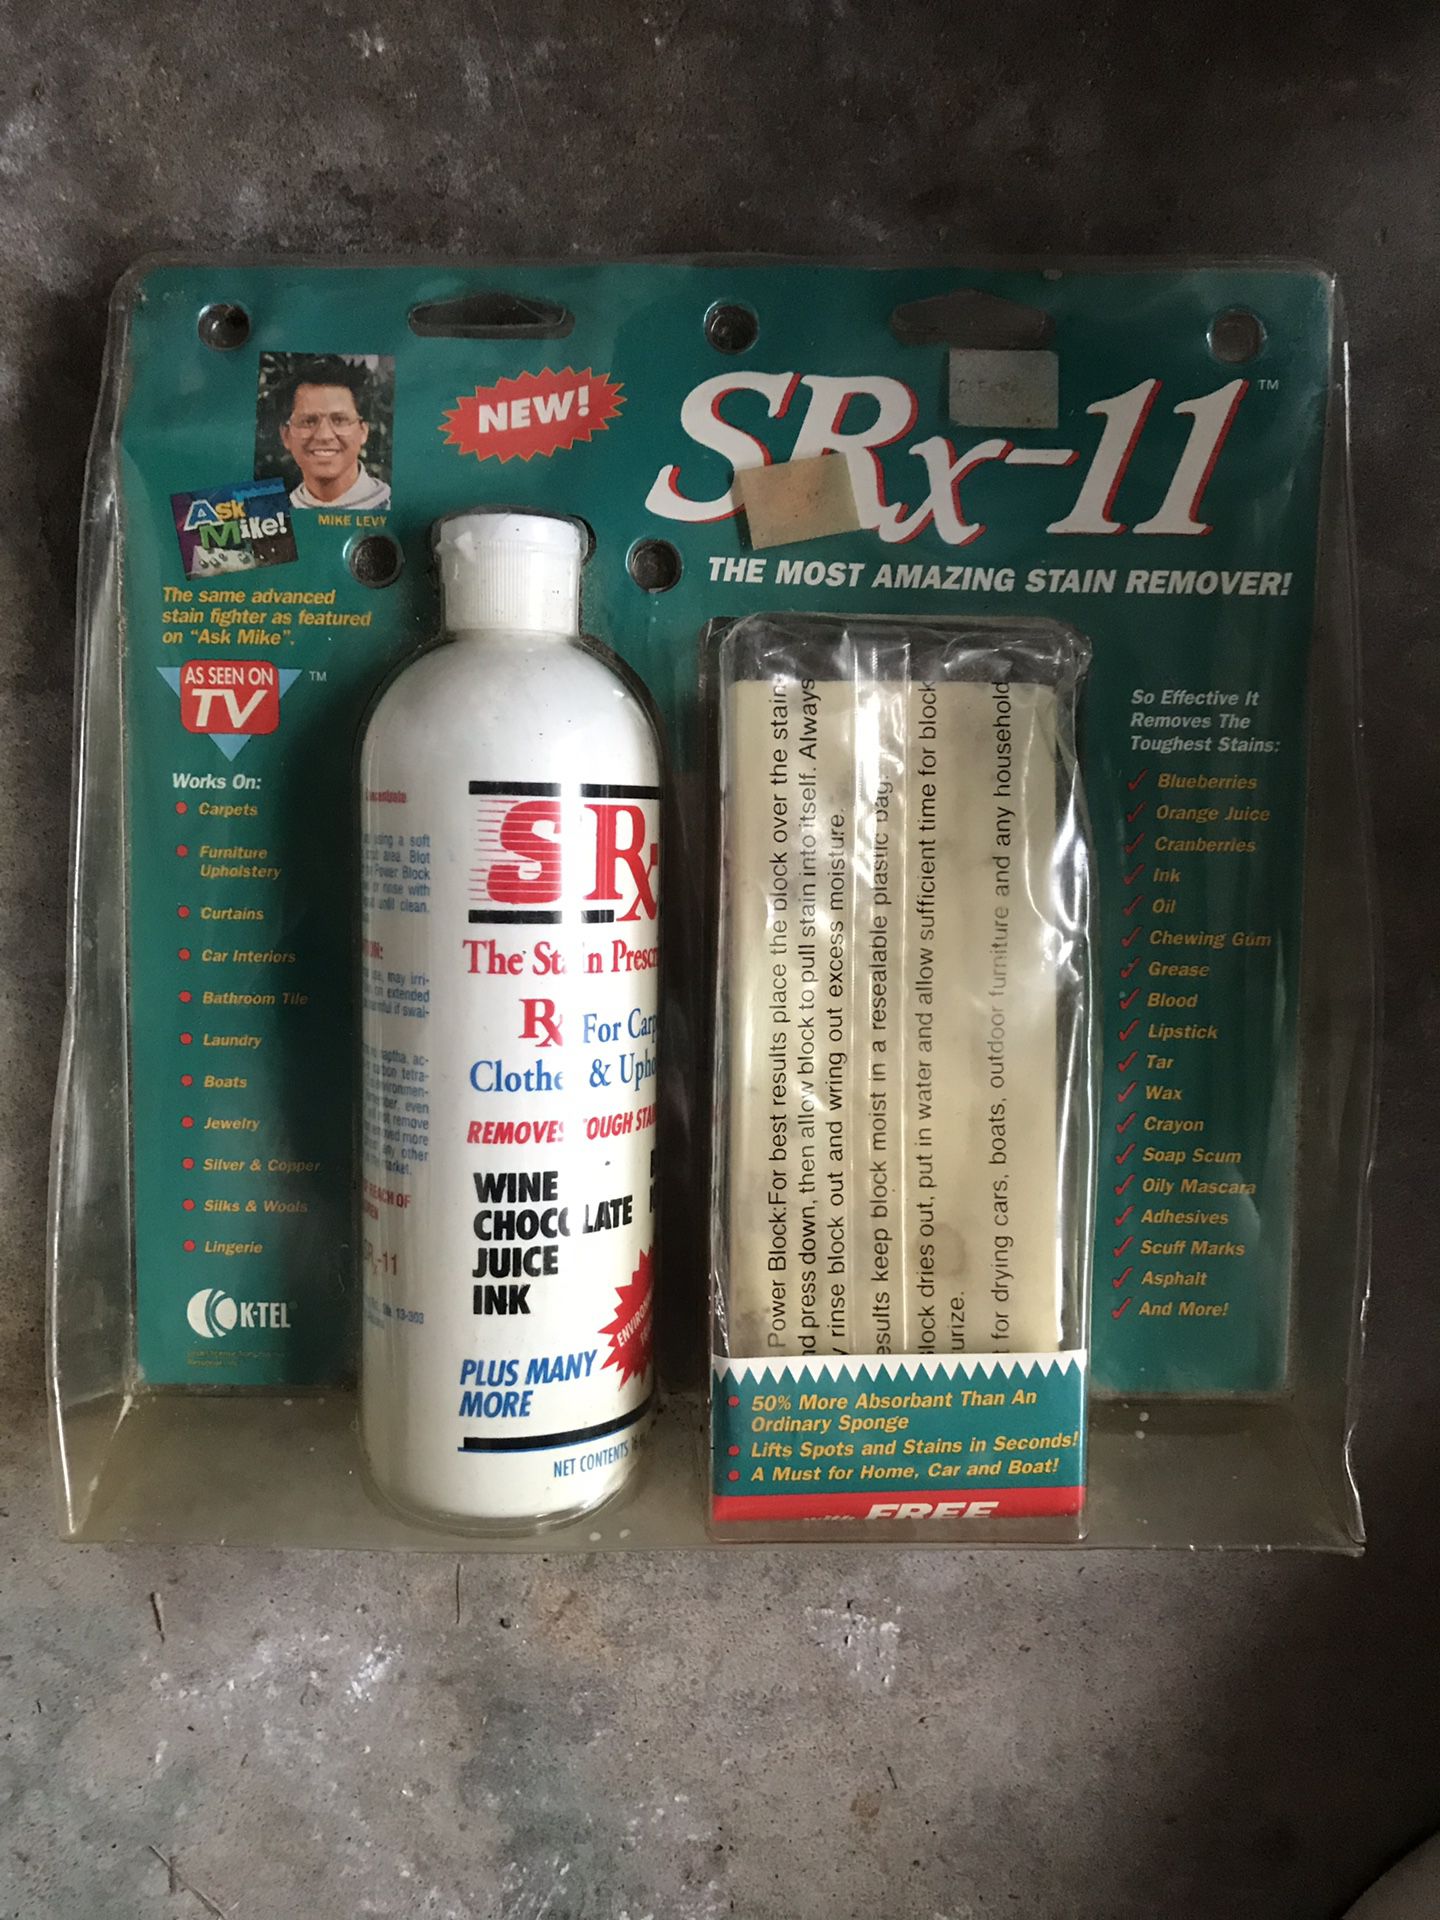 SRx-11 the most amazing stain remover!